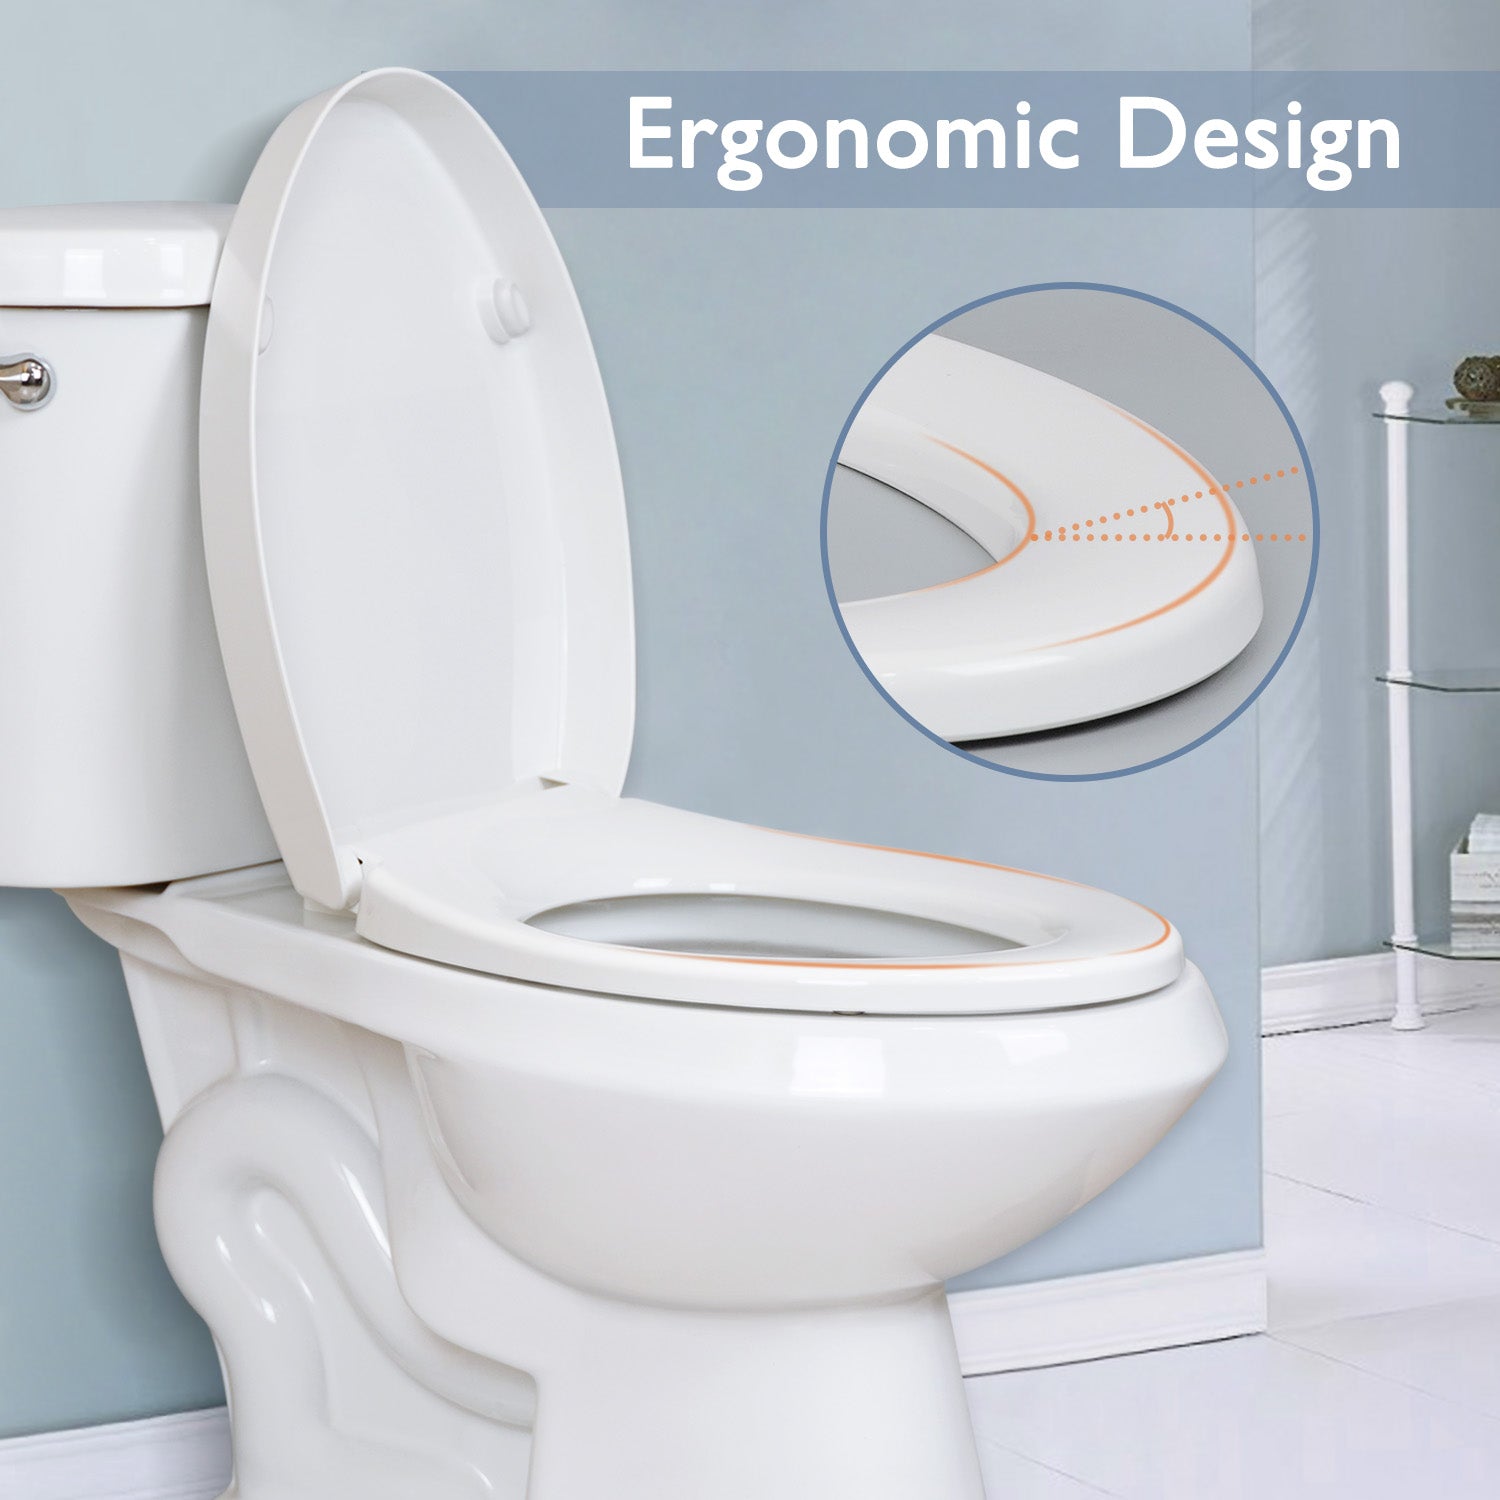 Elongated Slow Close Toilet Seat, Easy to Install & Clean, Removable, Plastic , White